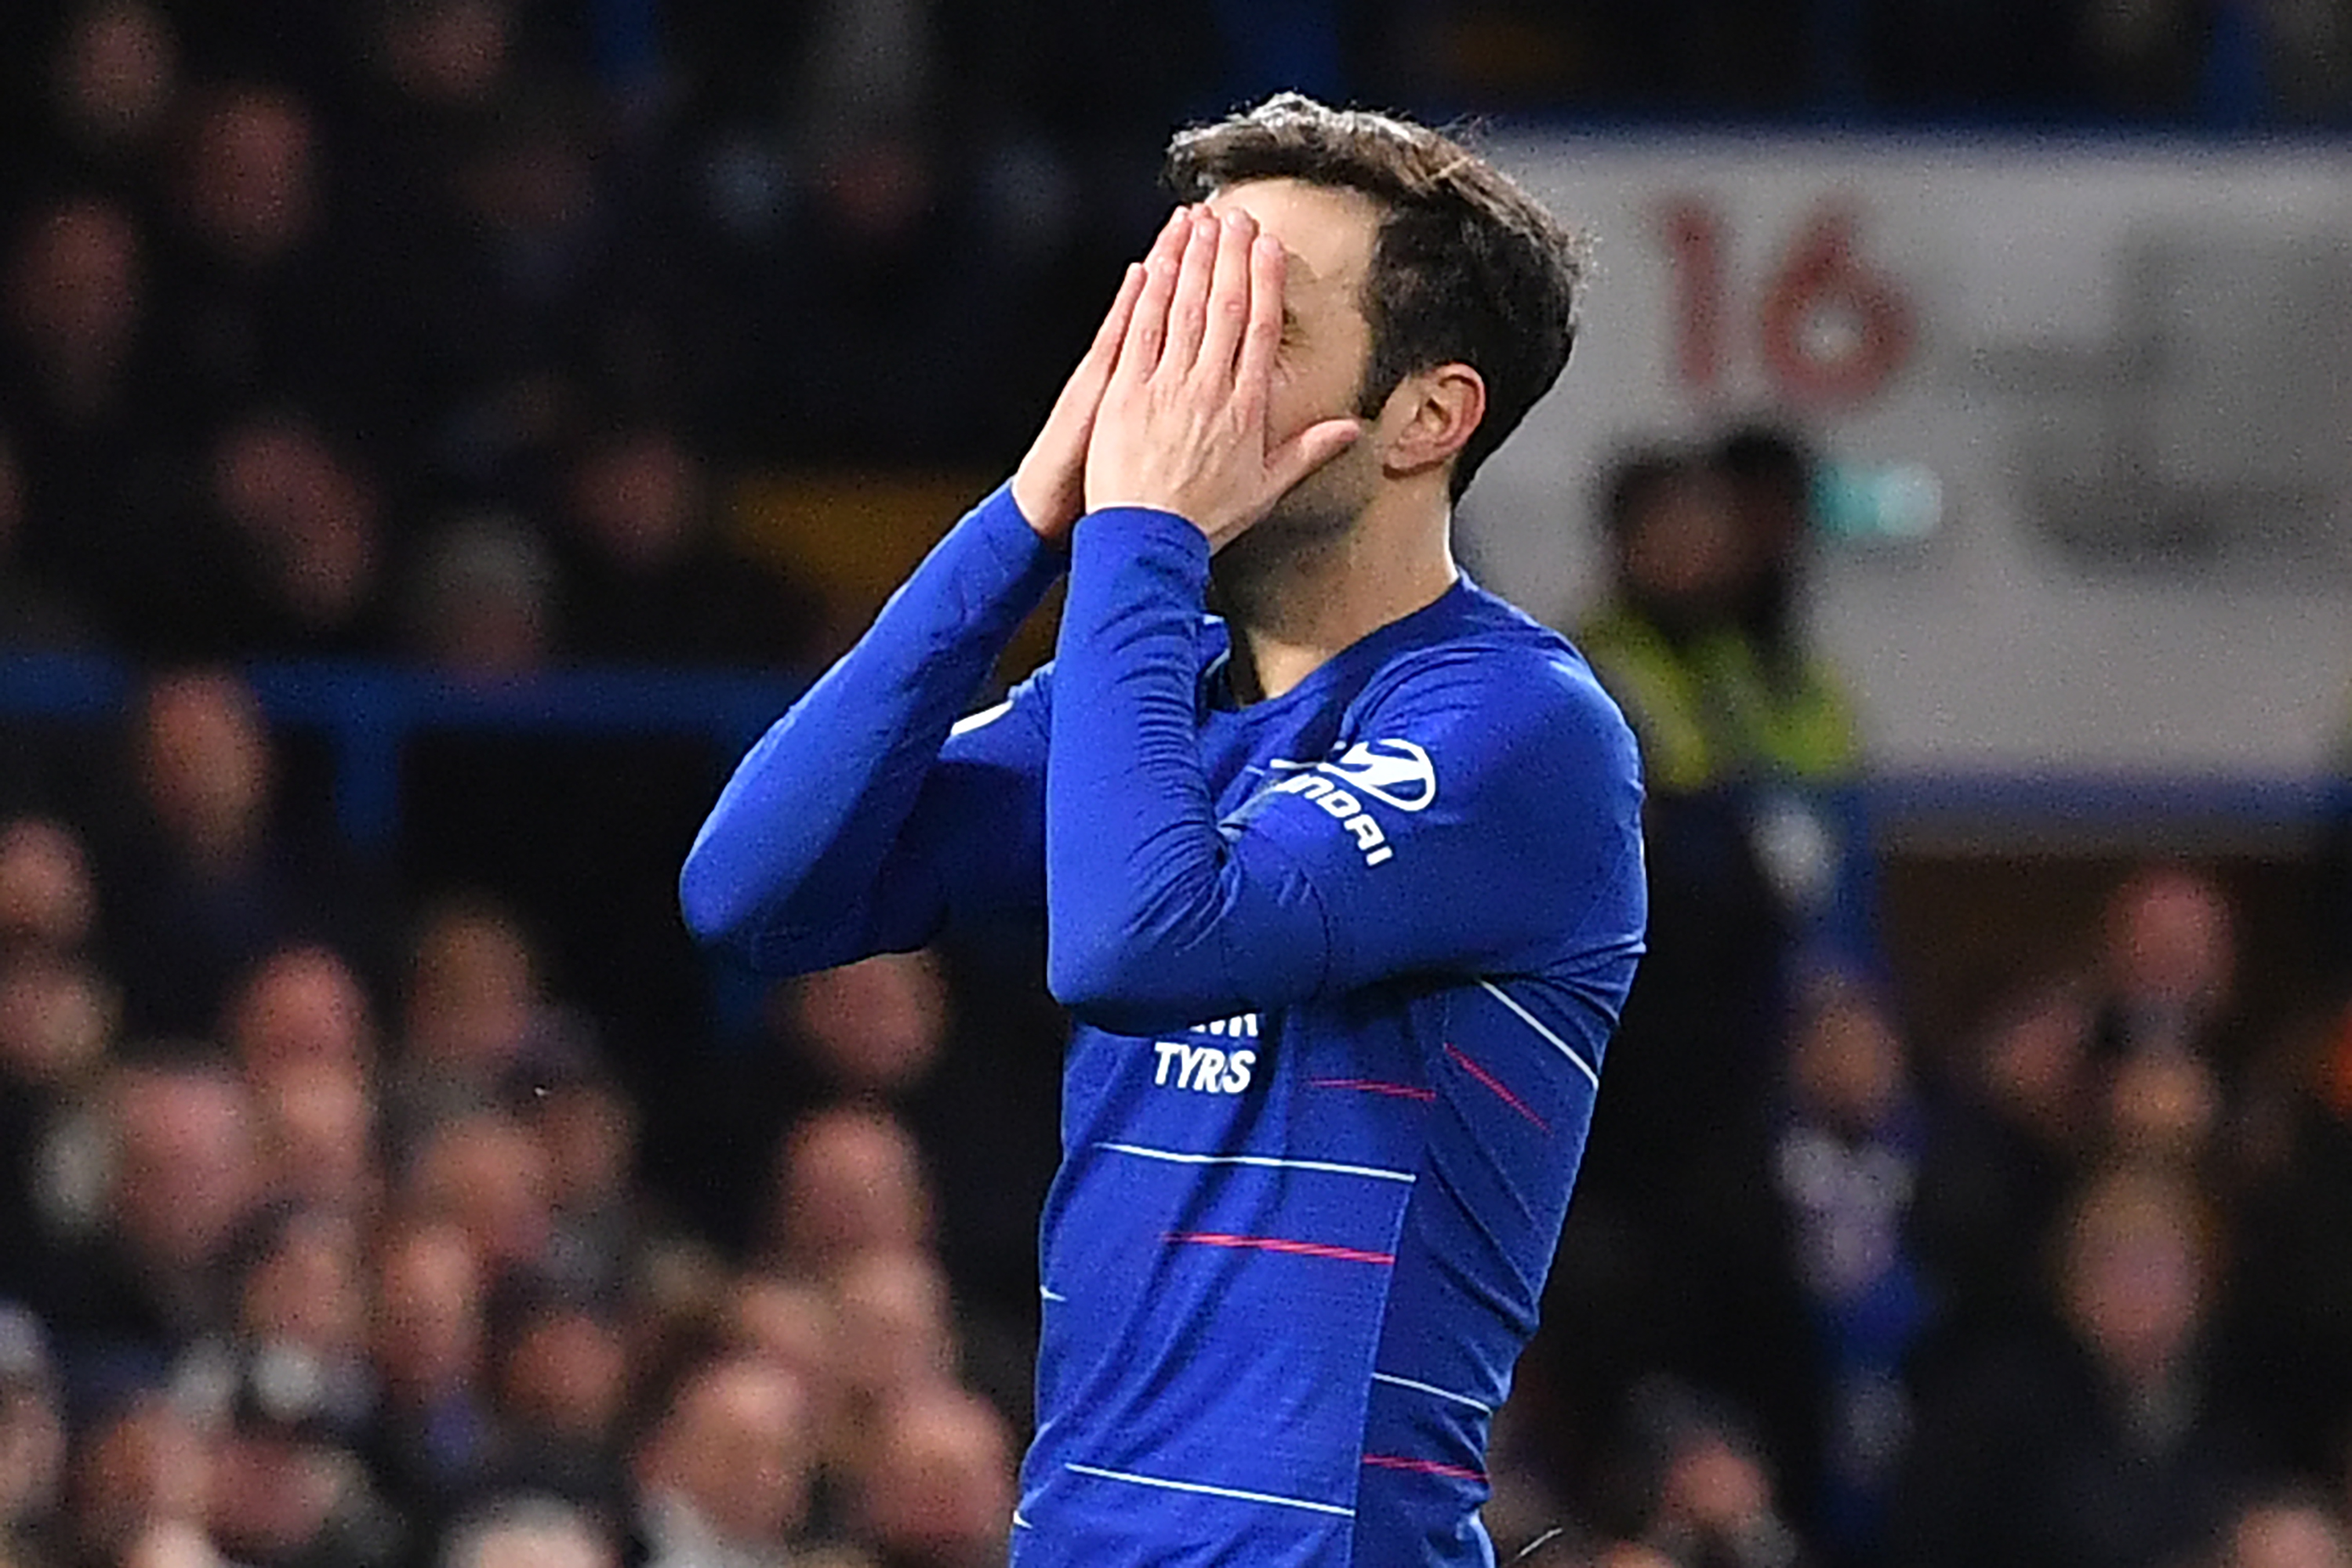 Chelsea's Spanish midfielder Cesc Fabregas reacts after missing a chance during the English Premier League football match between Chelsea and Southampton at Stamford Bridge in London on January 2, 2019. (Photo by Ben STANSALL / AFP) / RESTRICTED TO EDITORIAL USE. No use with unauthorized audio, video, data, fixture lists, club/league logos or 'live' services. Online in-match use limited to 120 images. An additional 40 images may be used in extra time. No video emulation. Social media in-match use limited to 120 images. An additional 40 images may be used in extra time. No use in betting publications, games or single club/league/player publications. /         (Photo credit should read BEN STANSALL/AFP/Getty Images)